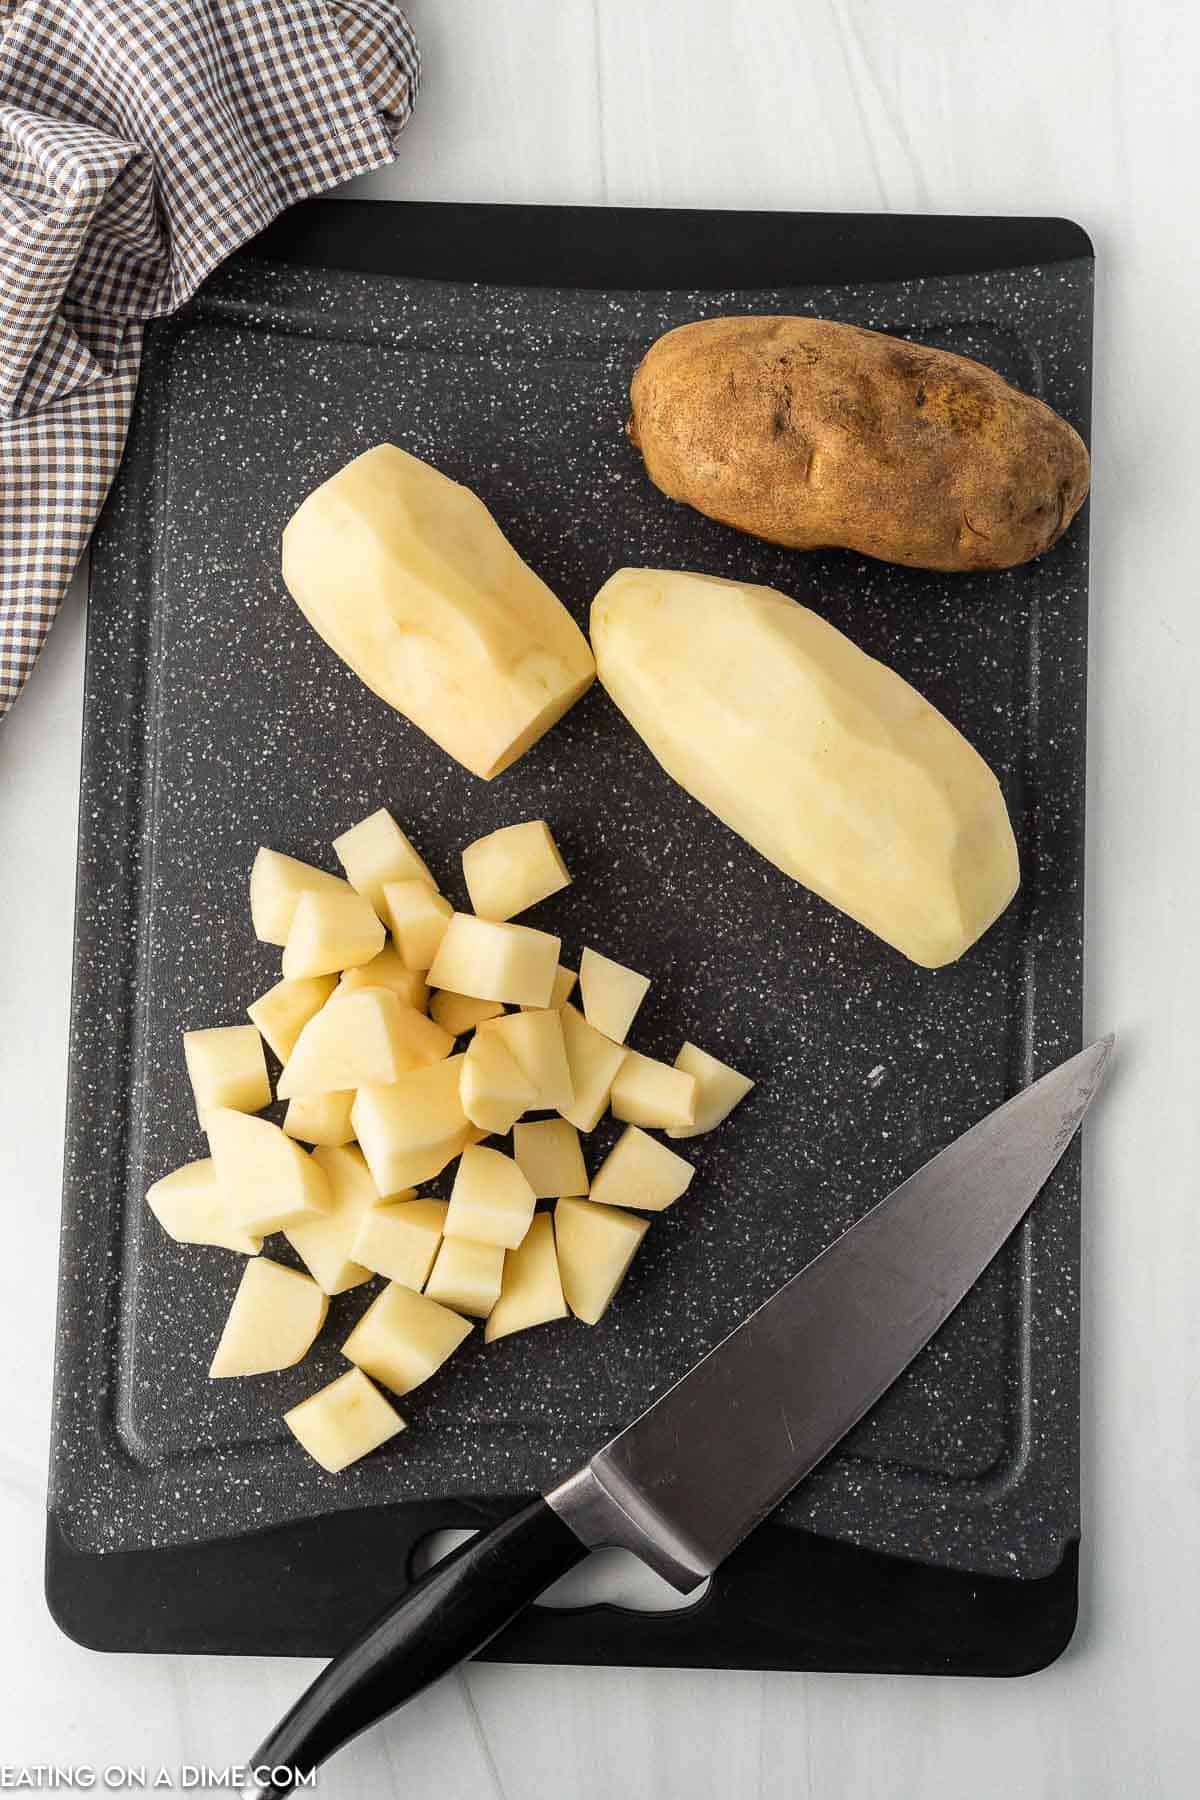 Peeled potatoes on a cutting board and dicing potatoes into small pieces